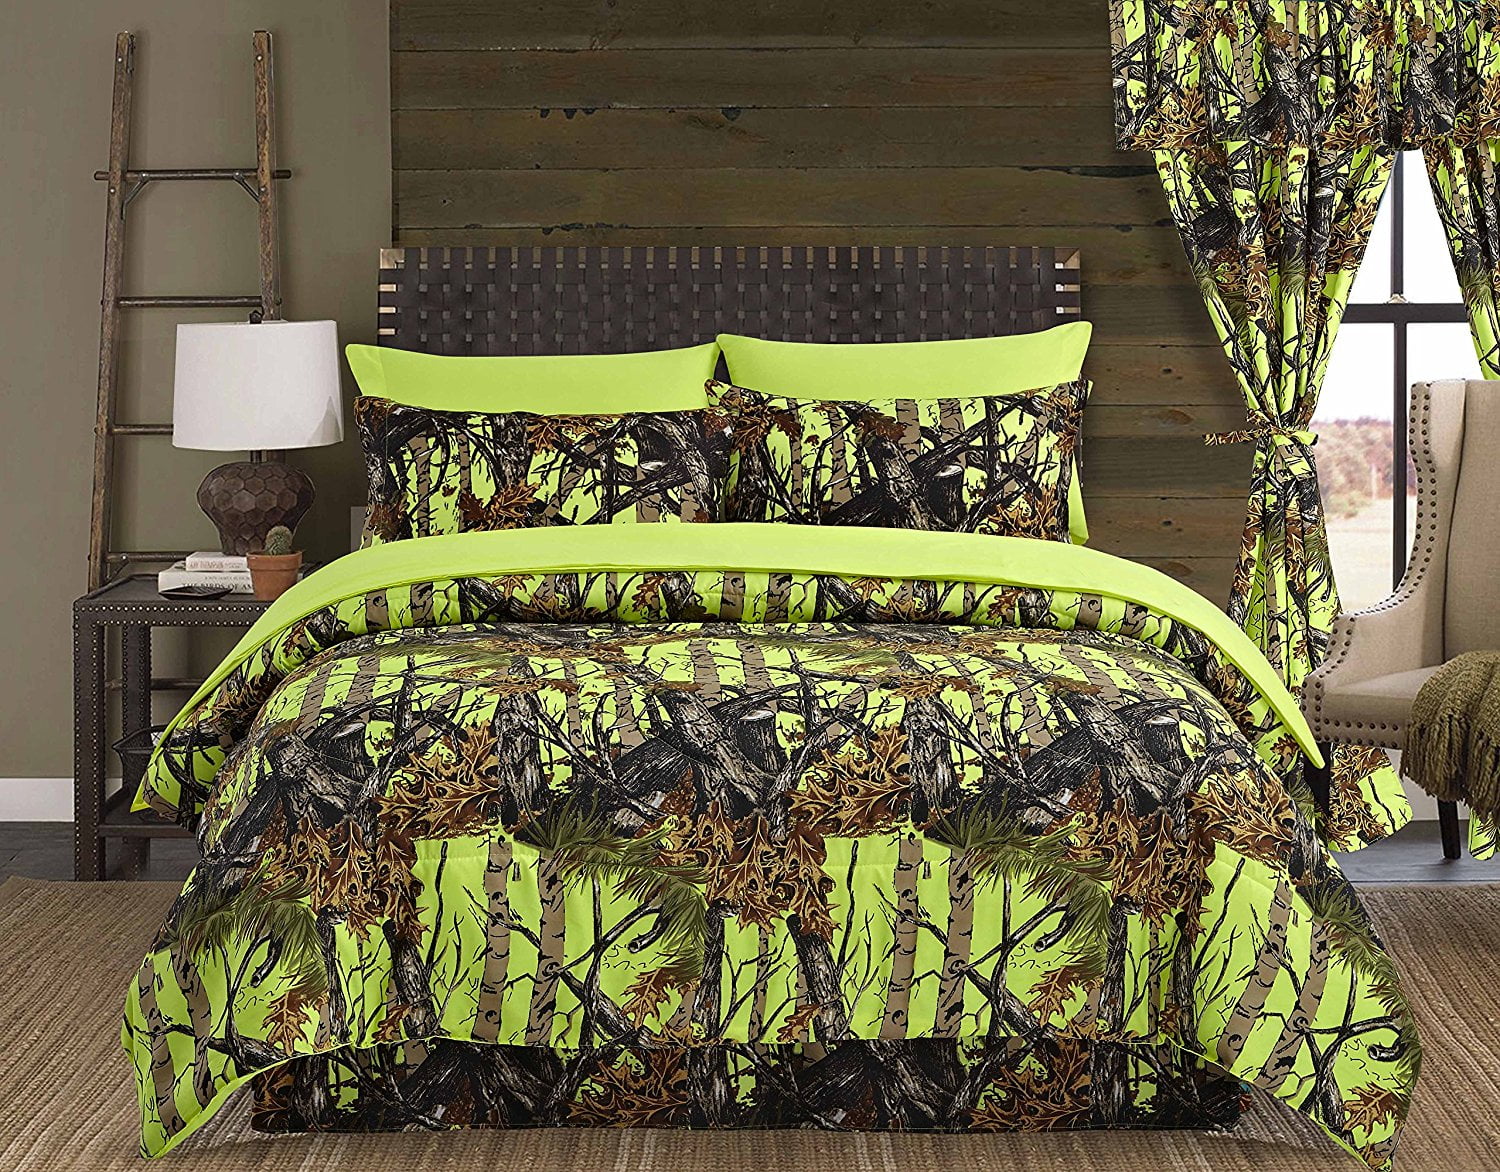 LIME CAMO SHEET SET! FULL SIZE BEDDING 6 PC CAMOUFLAGE LIGHT YELLOW GREEN